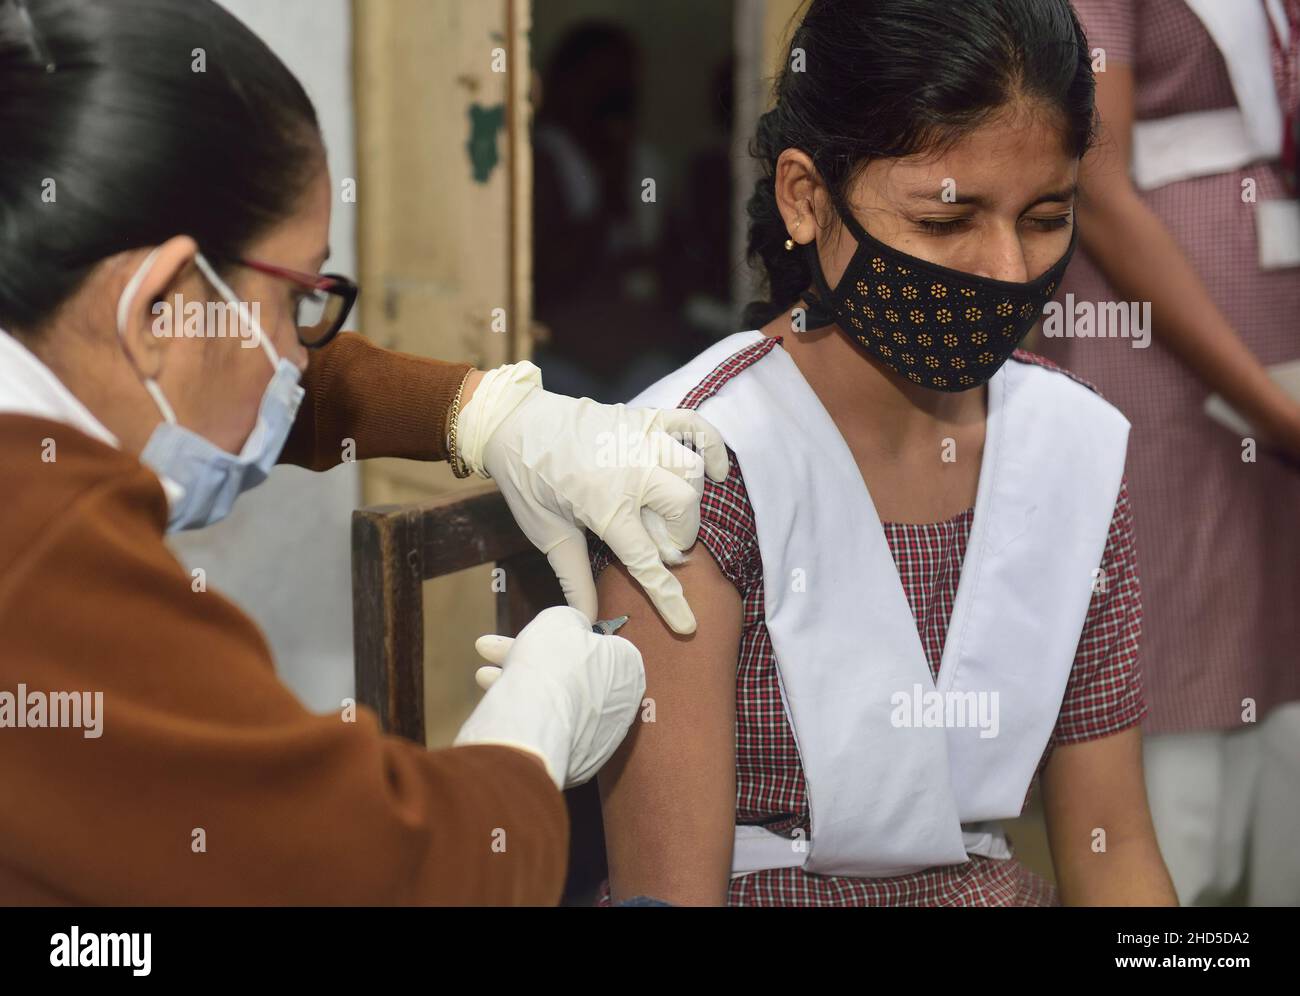 Kolkata, India. 1st Jan, 2014. A health worker administers a dose of Covaxin vaccine to a student at Uccha Balika Vidyalaya (Barisha) school in Kolkata.In India Covid vaccination for 15 to 18 year age group starts today. Nearly 2.7 million teenagers have registered for their jabs even as a country witnessing a sharp surge of Covid-19 cases fueled by the new Omicron variant of coronavirus. (Credit Image: © Sumit Sanyal/SOPA Images via ZUMA Press Wire) Stock Photo